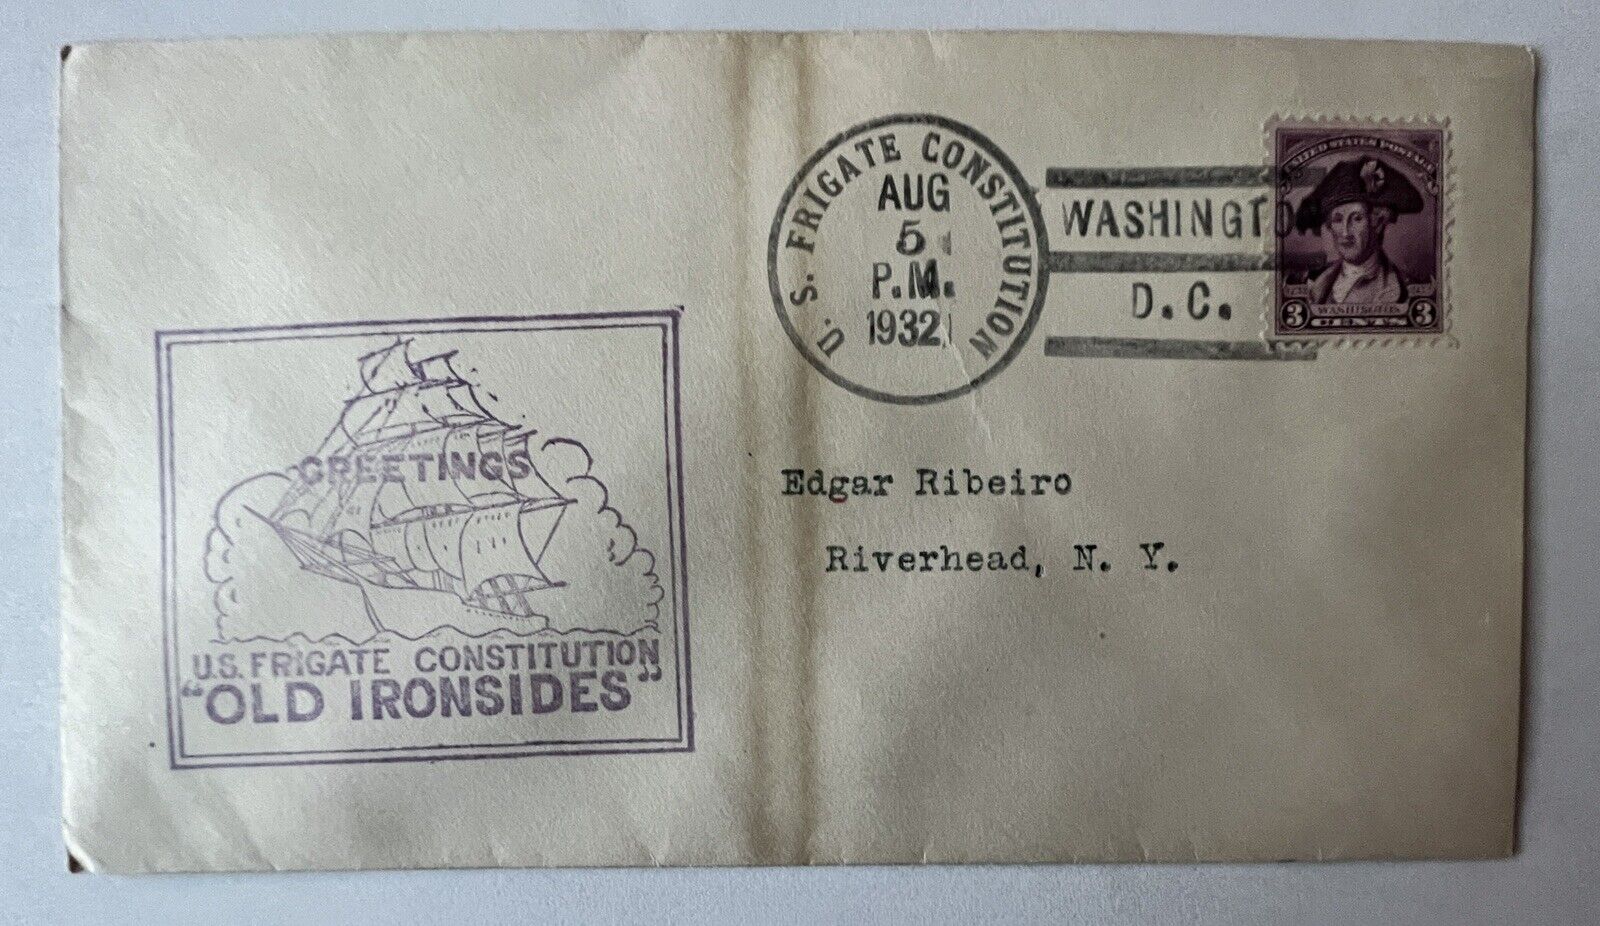 1932 GREETINGS OLD IRONSIDES CACHET COVER US FRIGATE CONSTITUTION DC TO NY